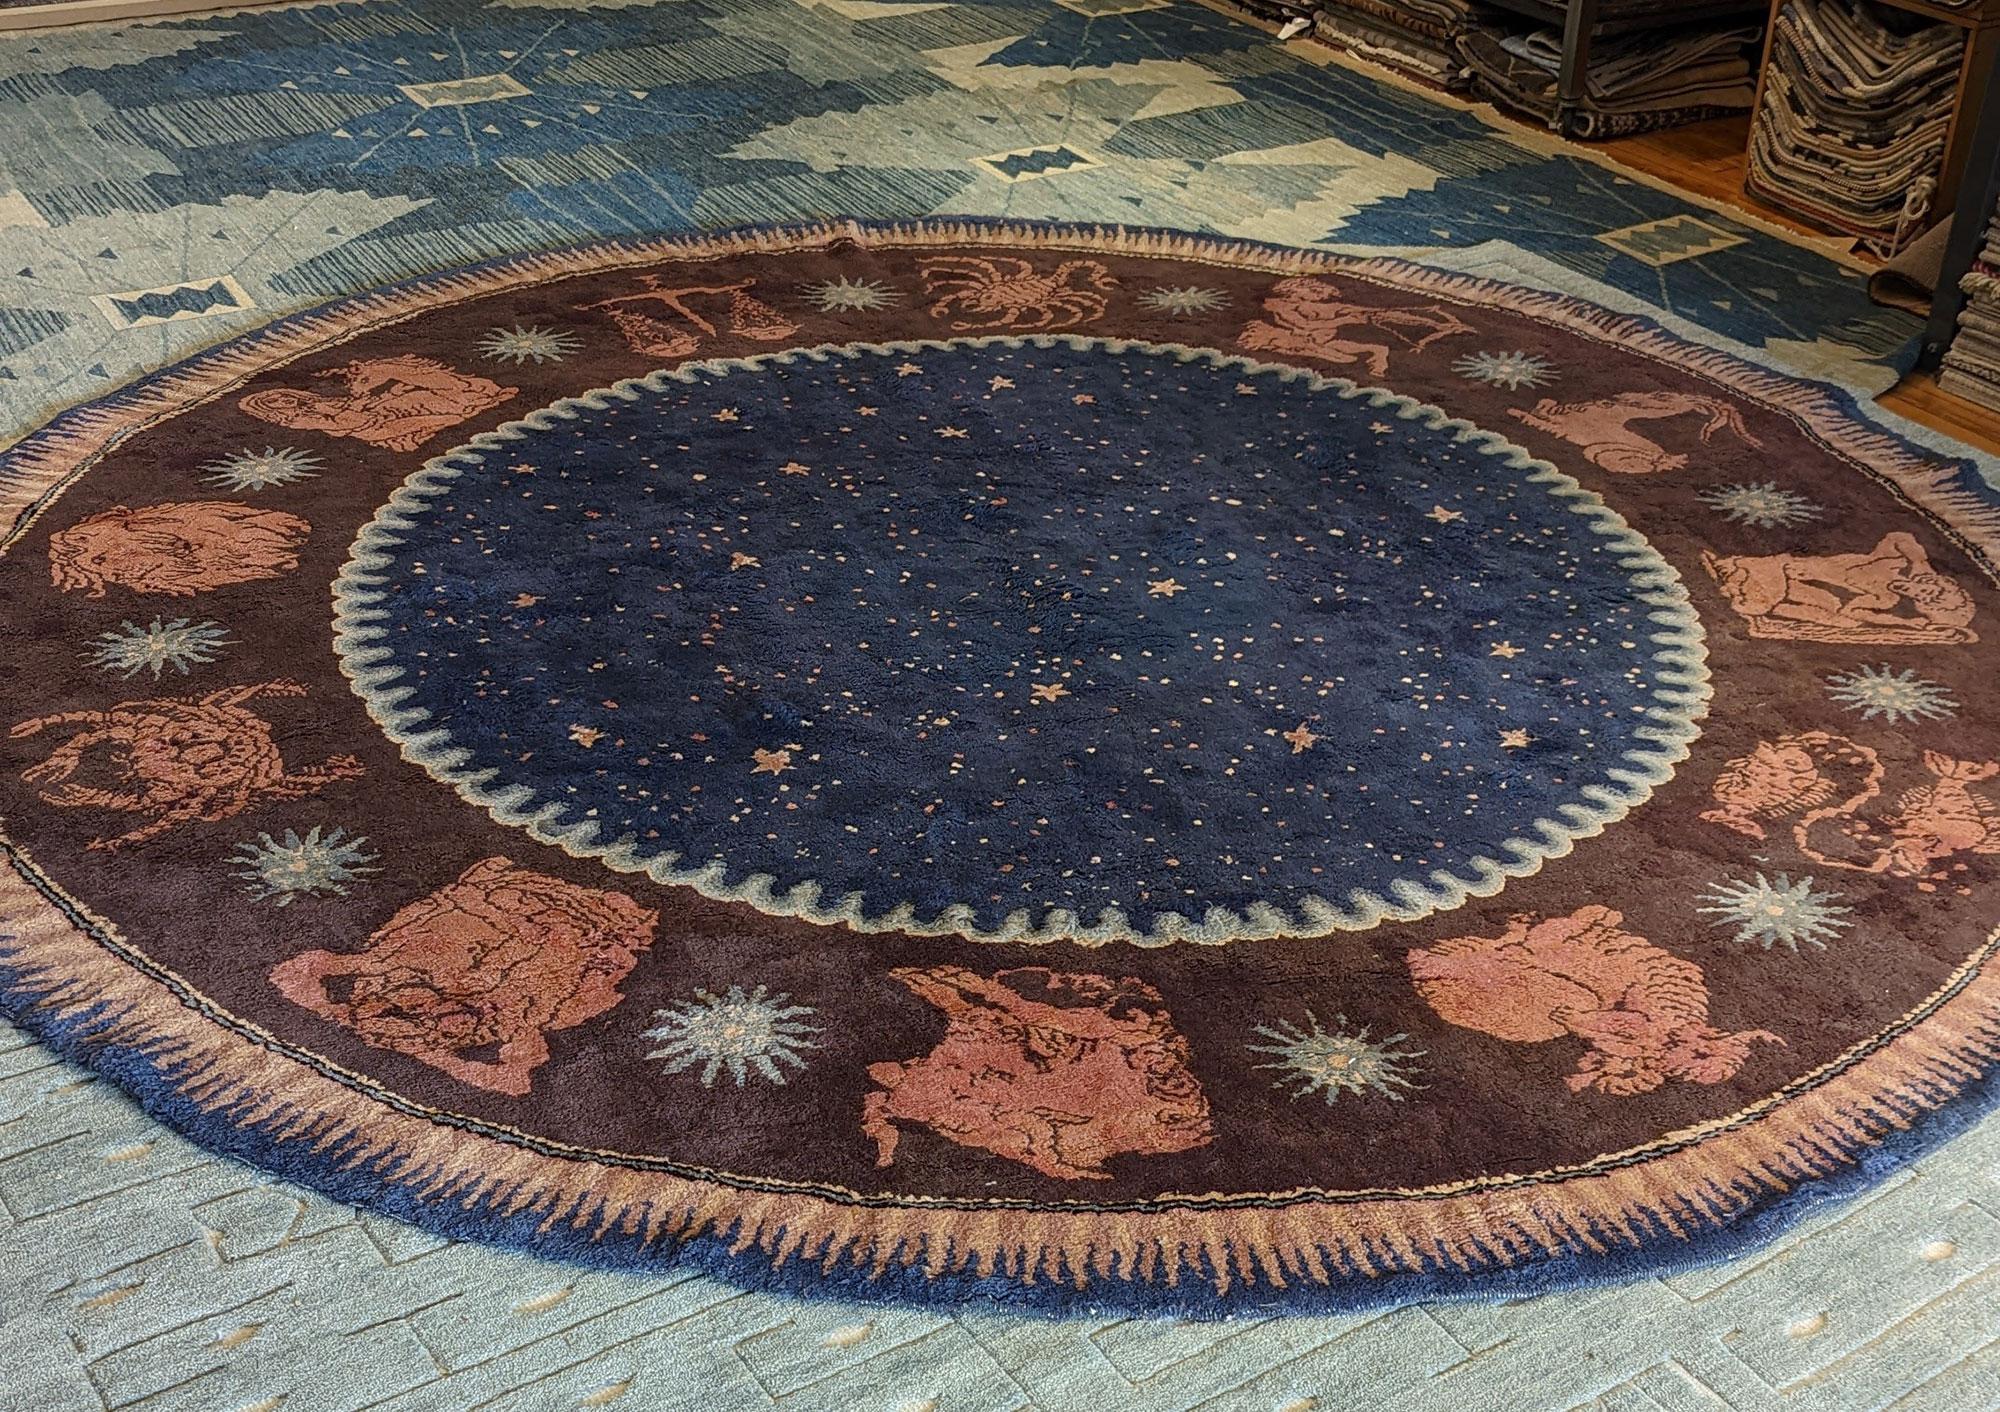 Rare Early 20th Century Round French Art Deco rug by Paul Follot
Size: 12'7